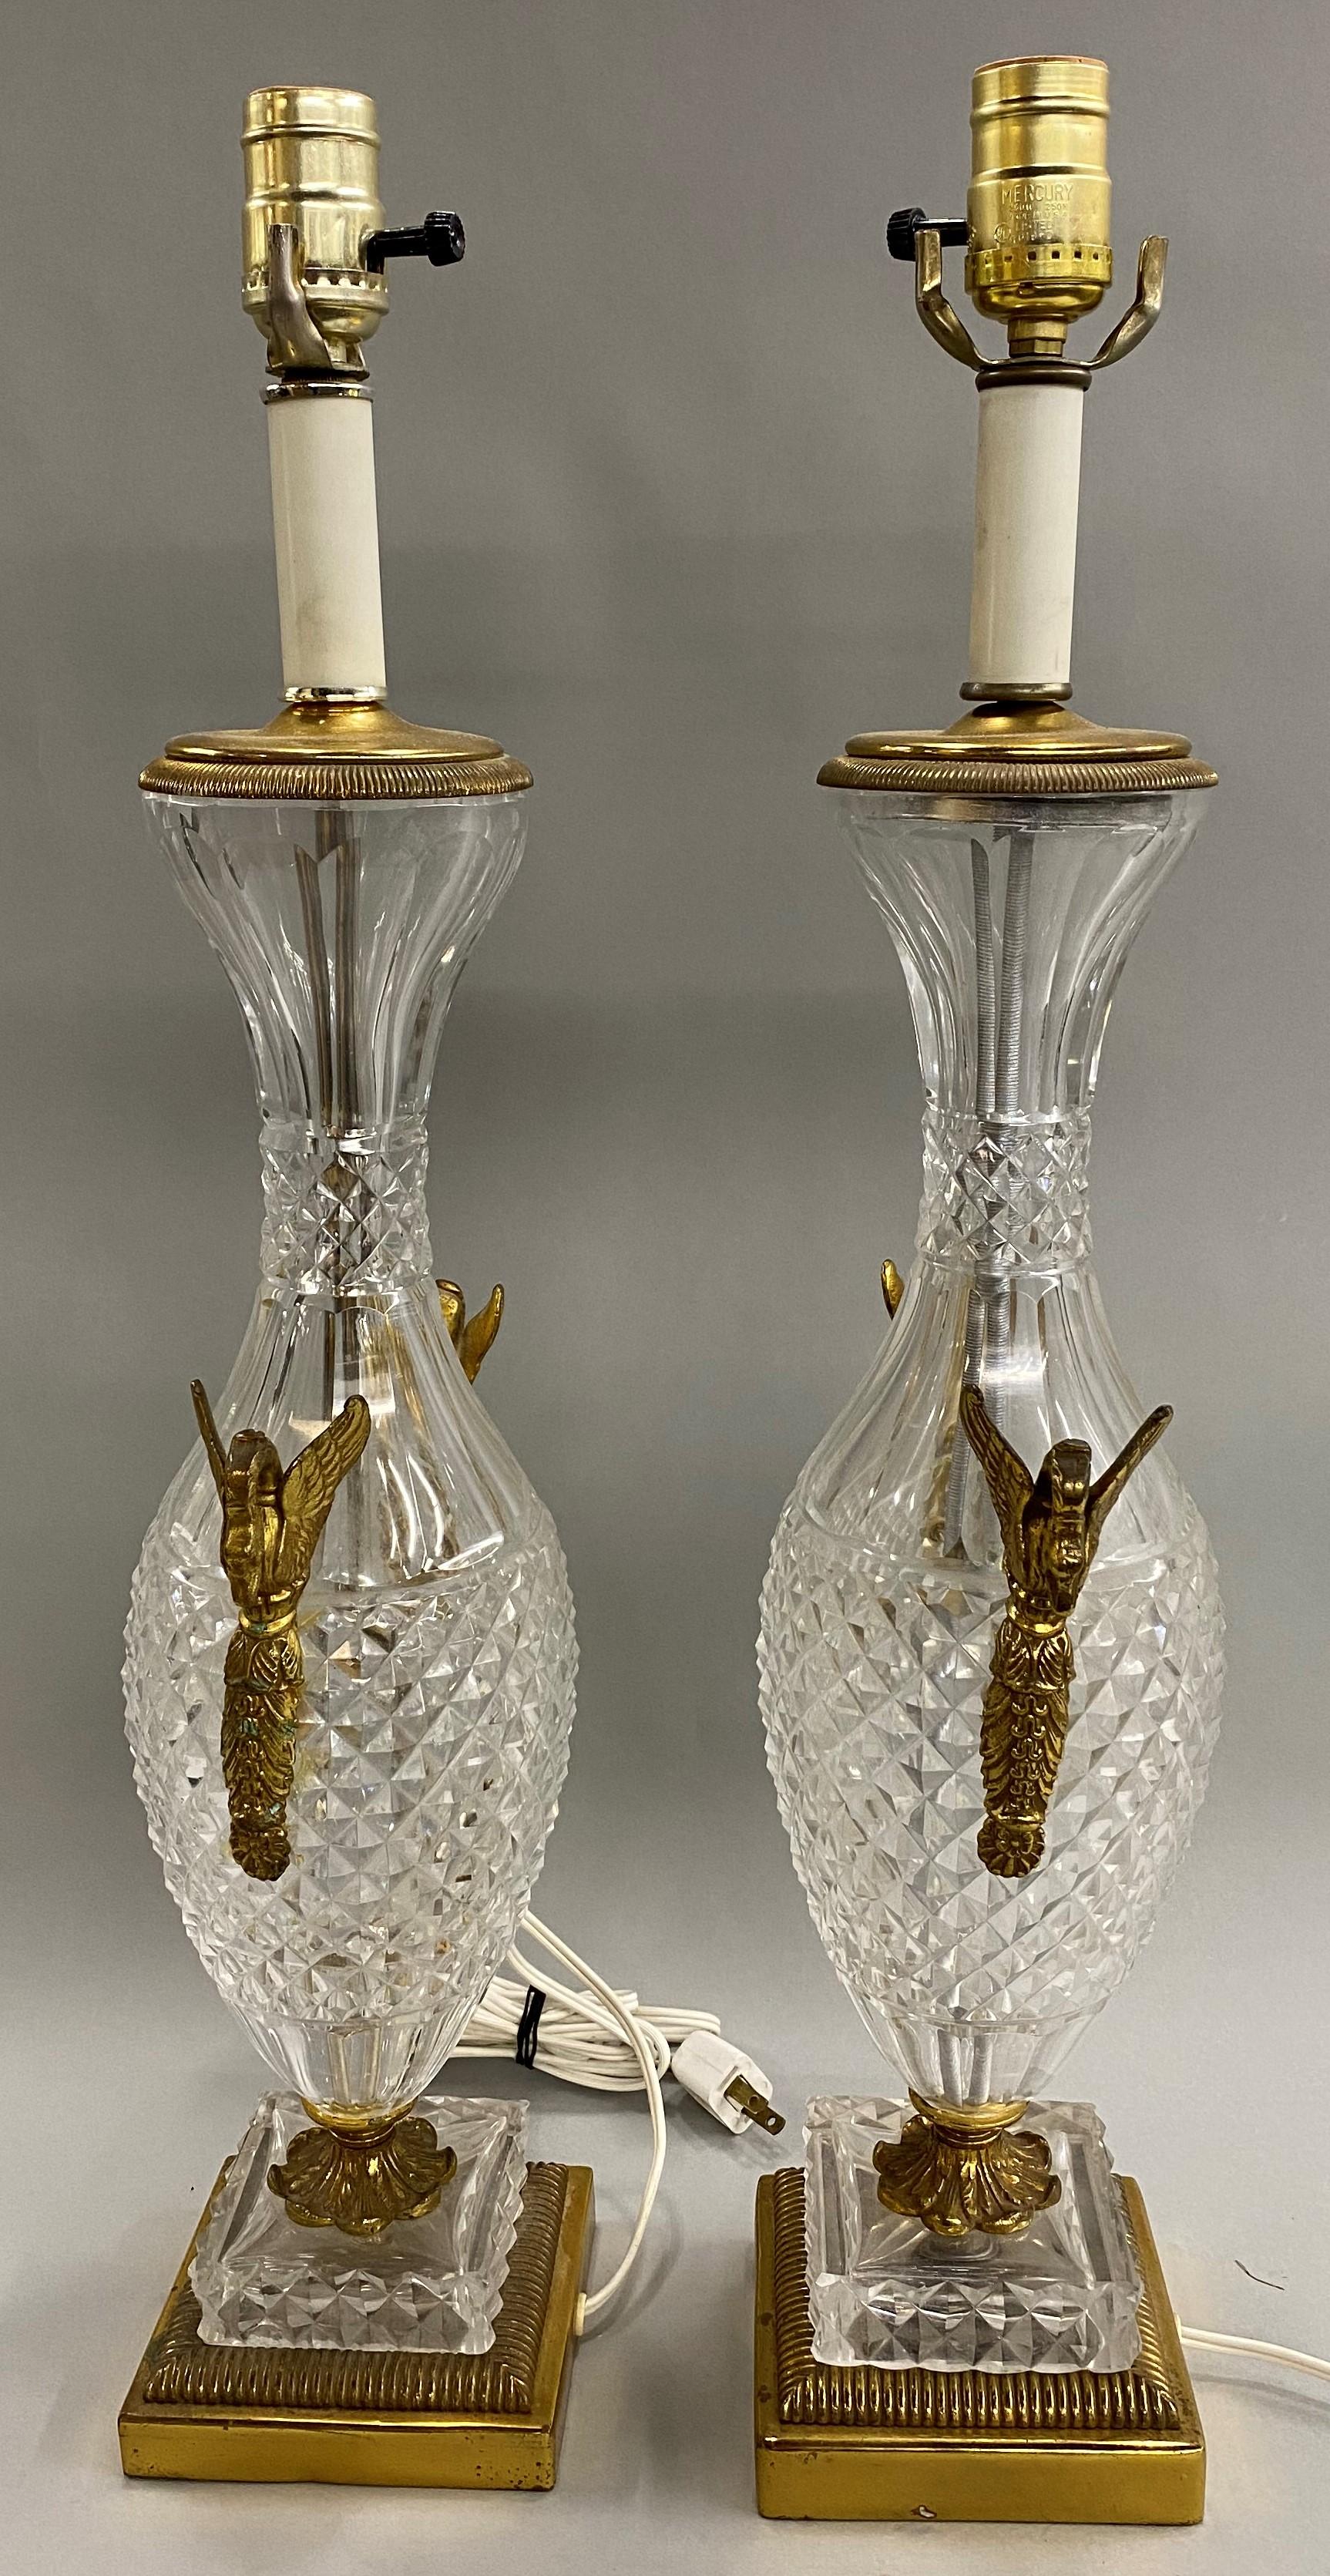 A beautiful pair of Baccarat crystal and gilt bronze table lamps, with applied swan ormolu, in good working order with new wiring, minor imperfections and light wear commensurate with age and use. The pair date to the 1930s and would make a fine